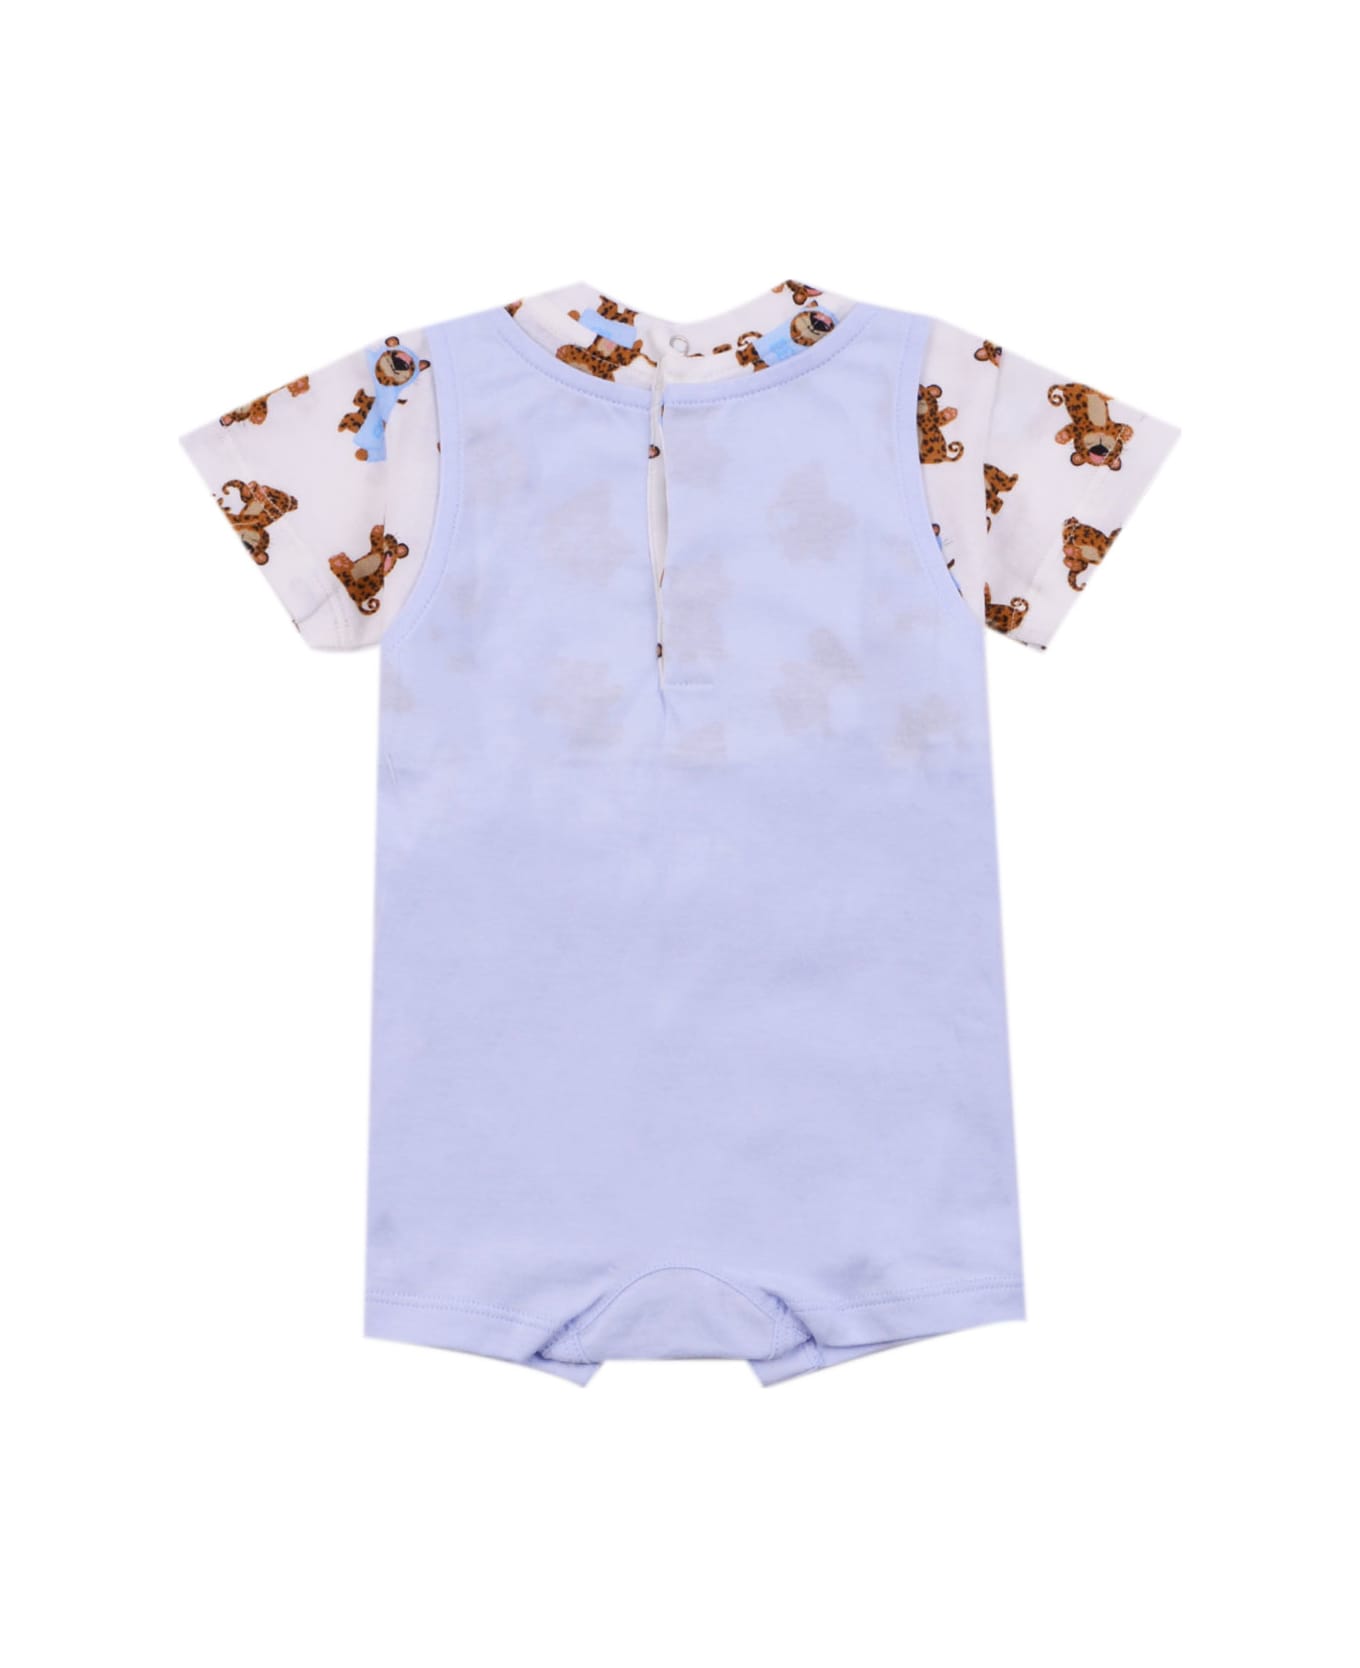 Dolce & Gabbana Printed T-shirt And Overalls Set - White